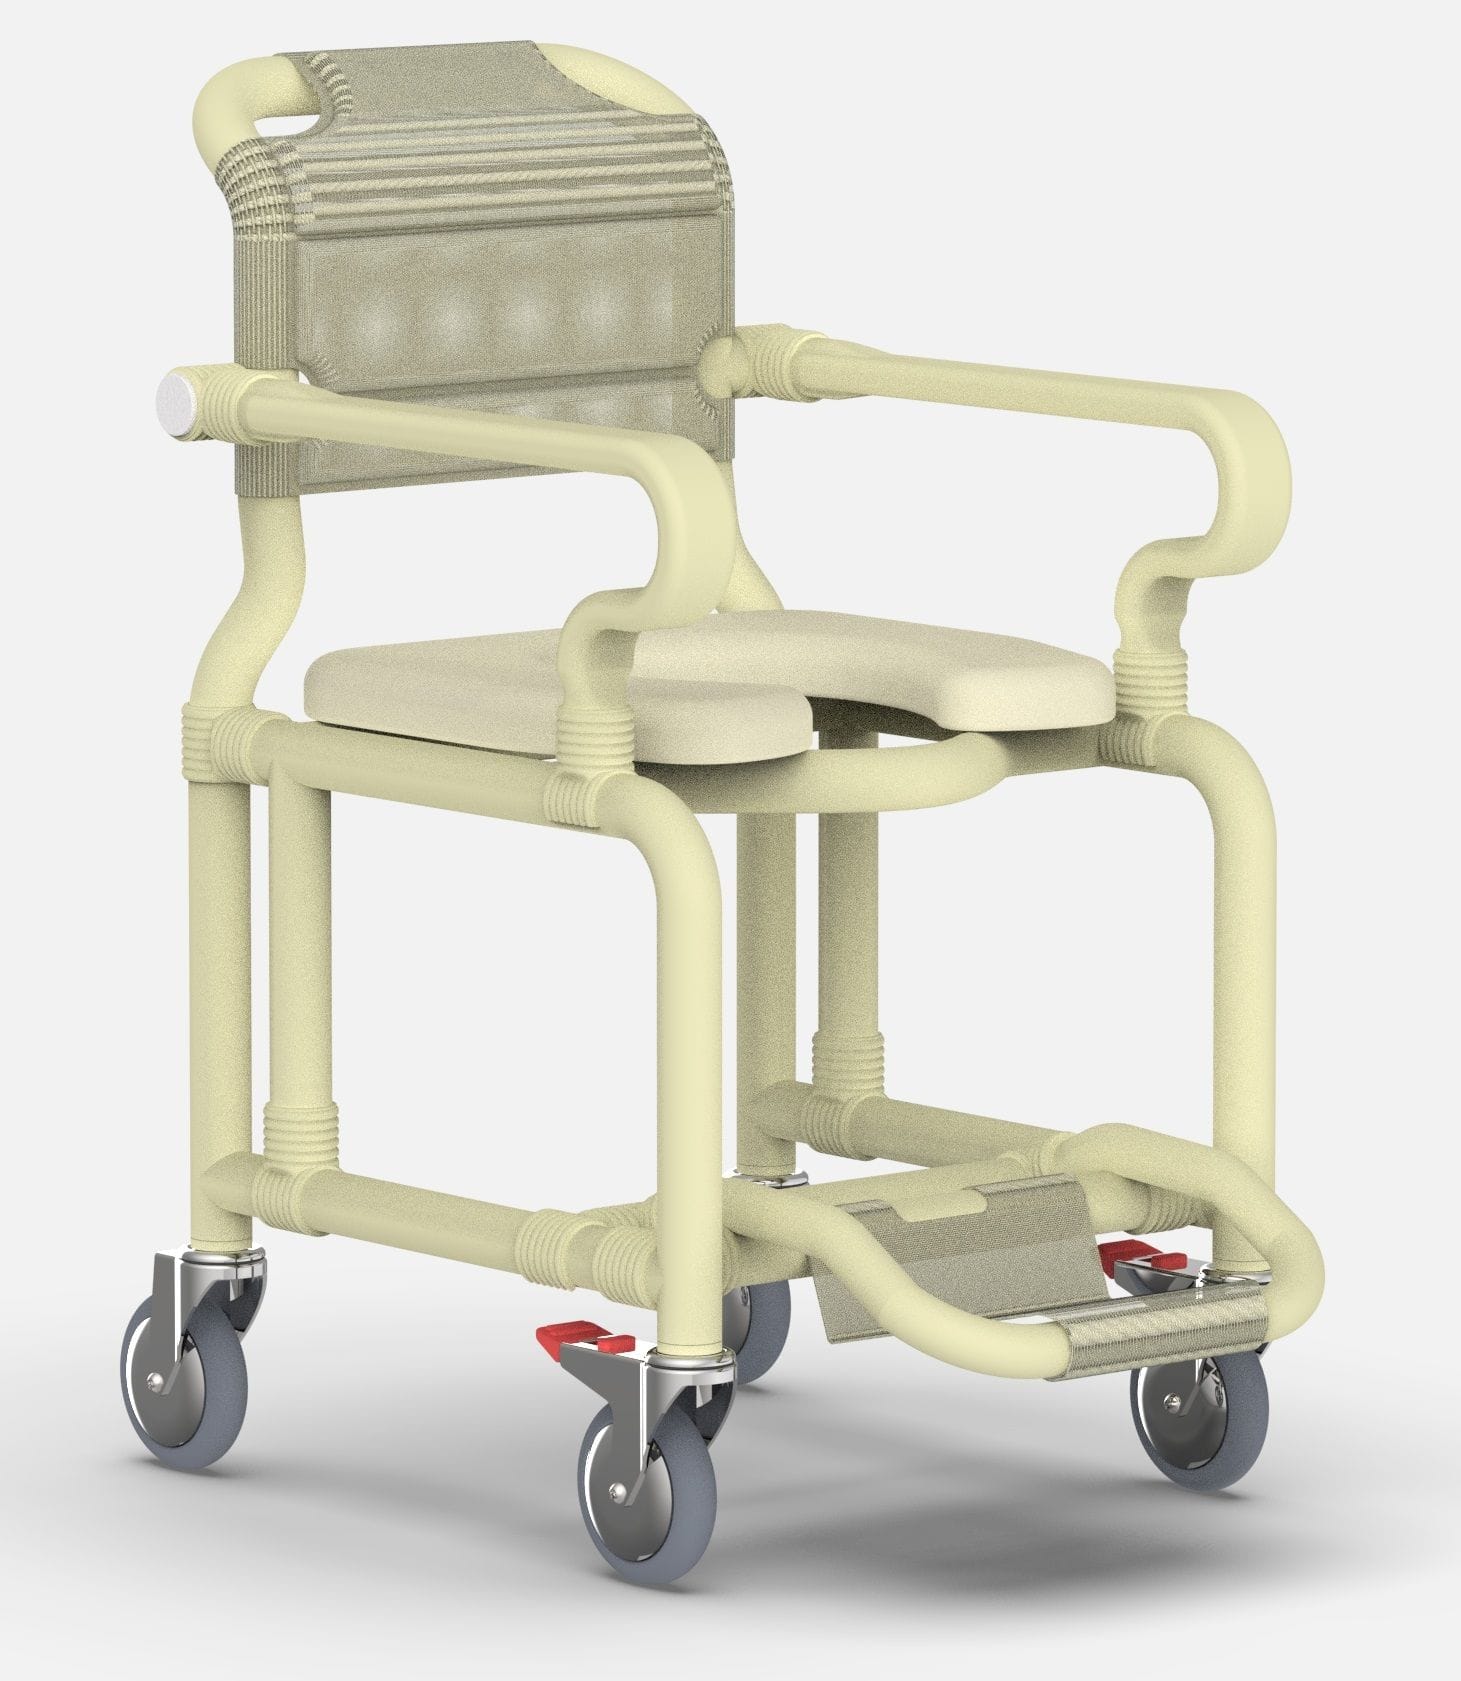 R100 Standard mobile shower chair with pan/pan holder